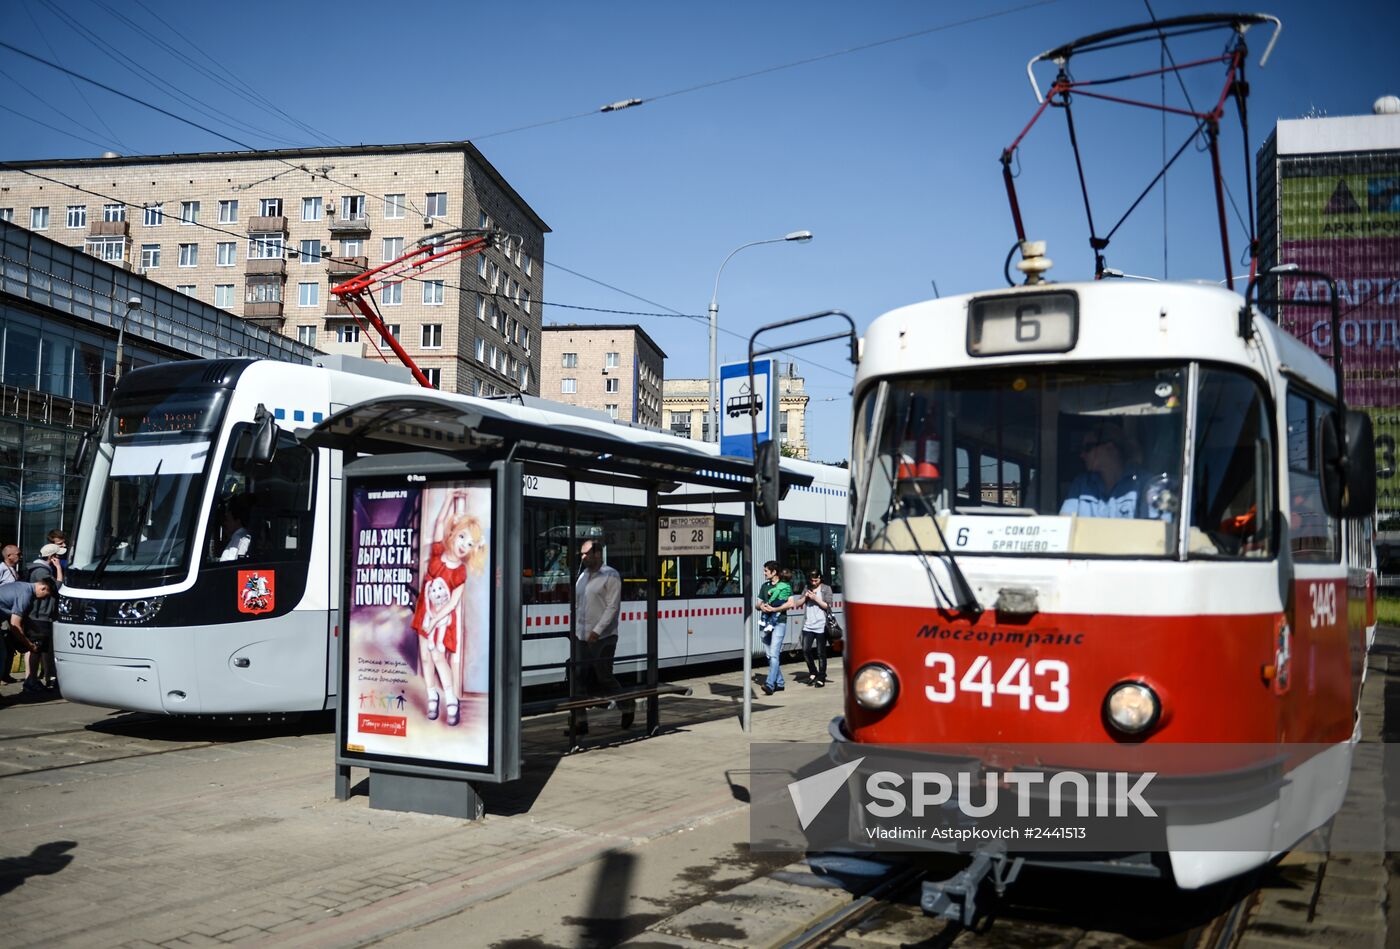 New-generation tram launched in Moscow